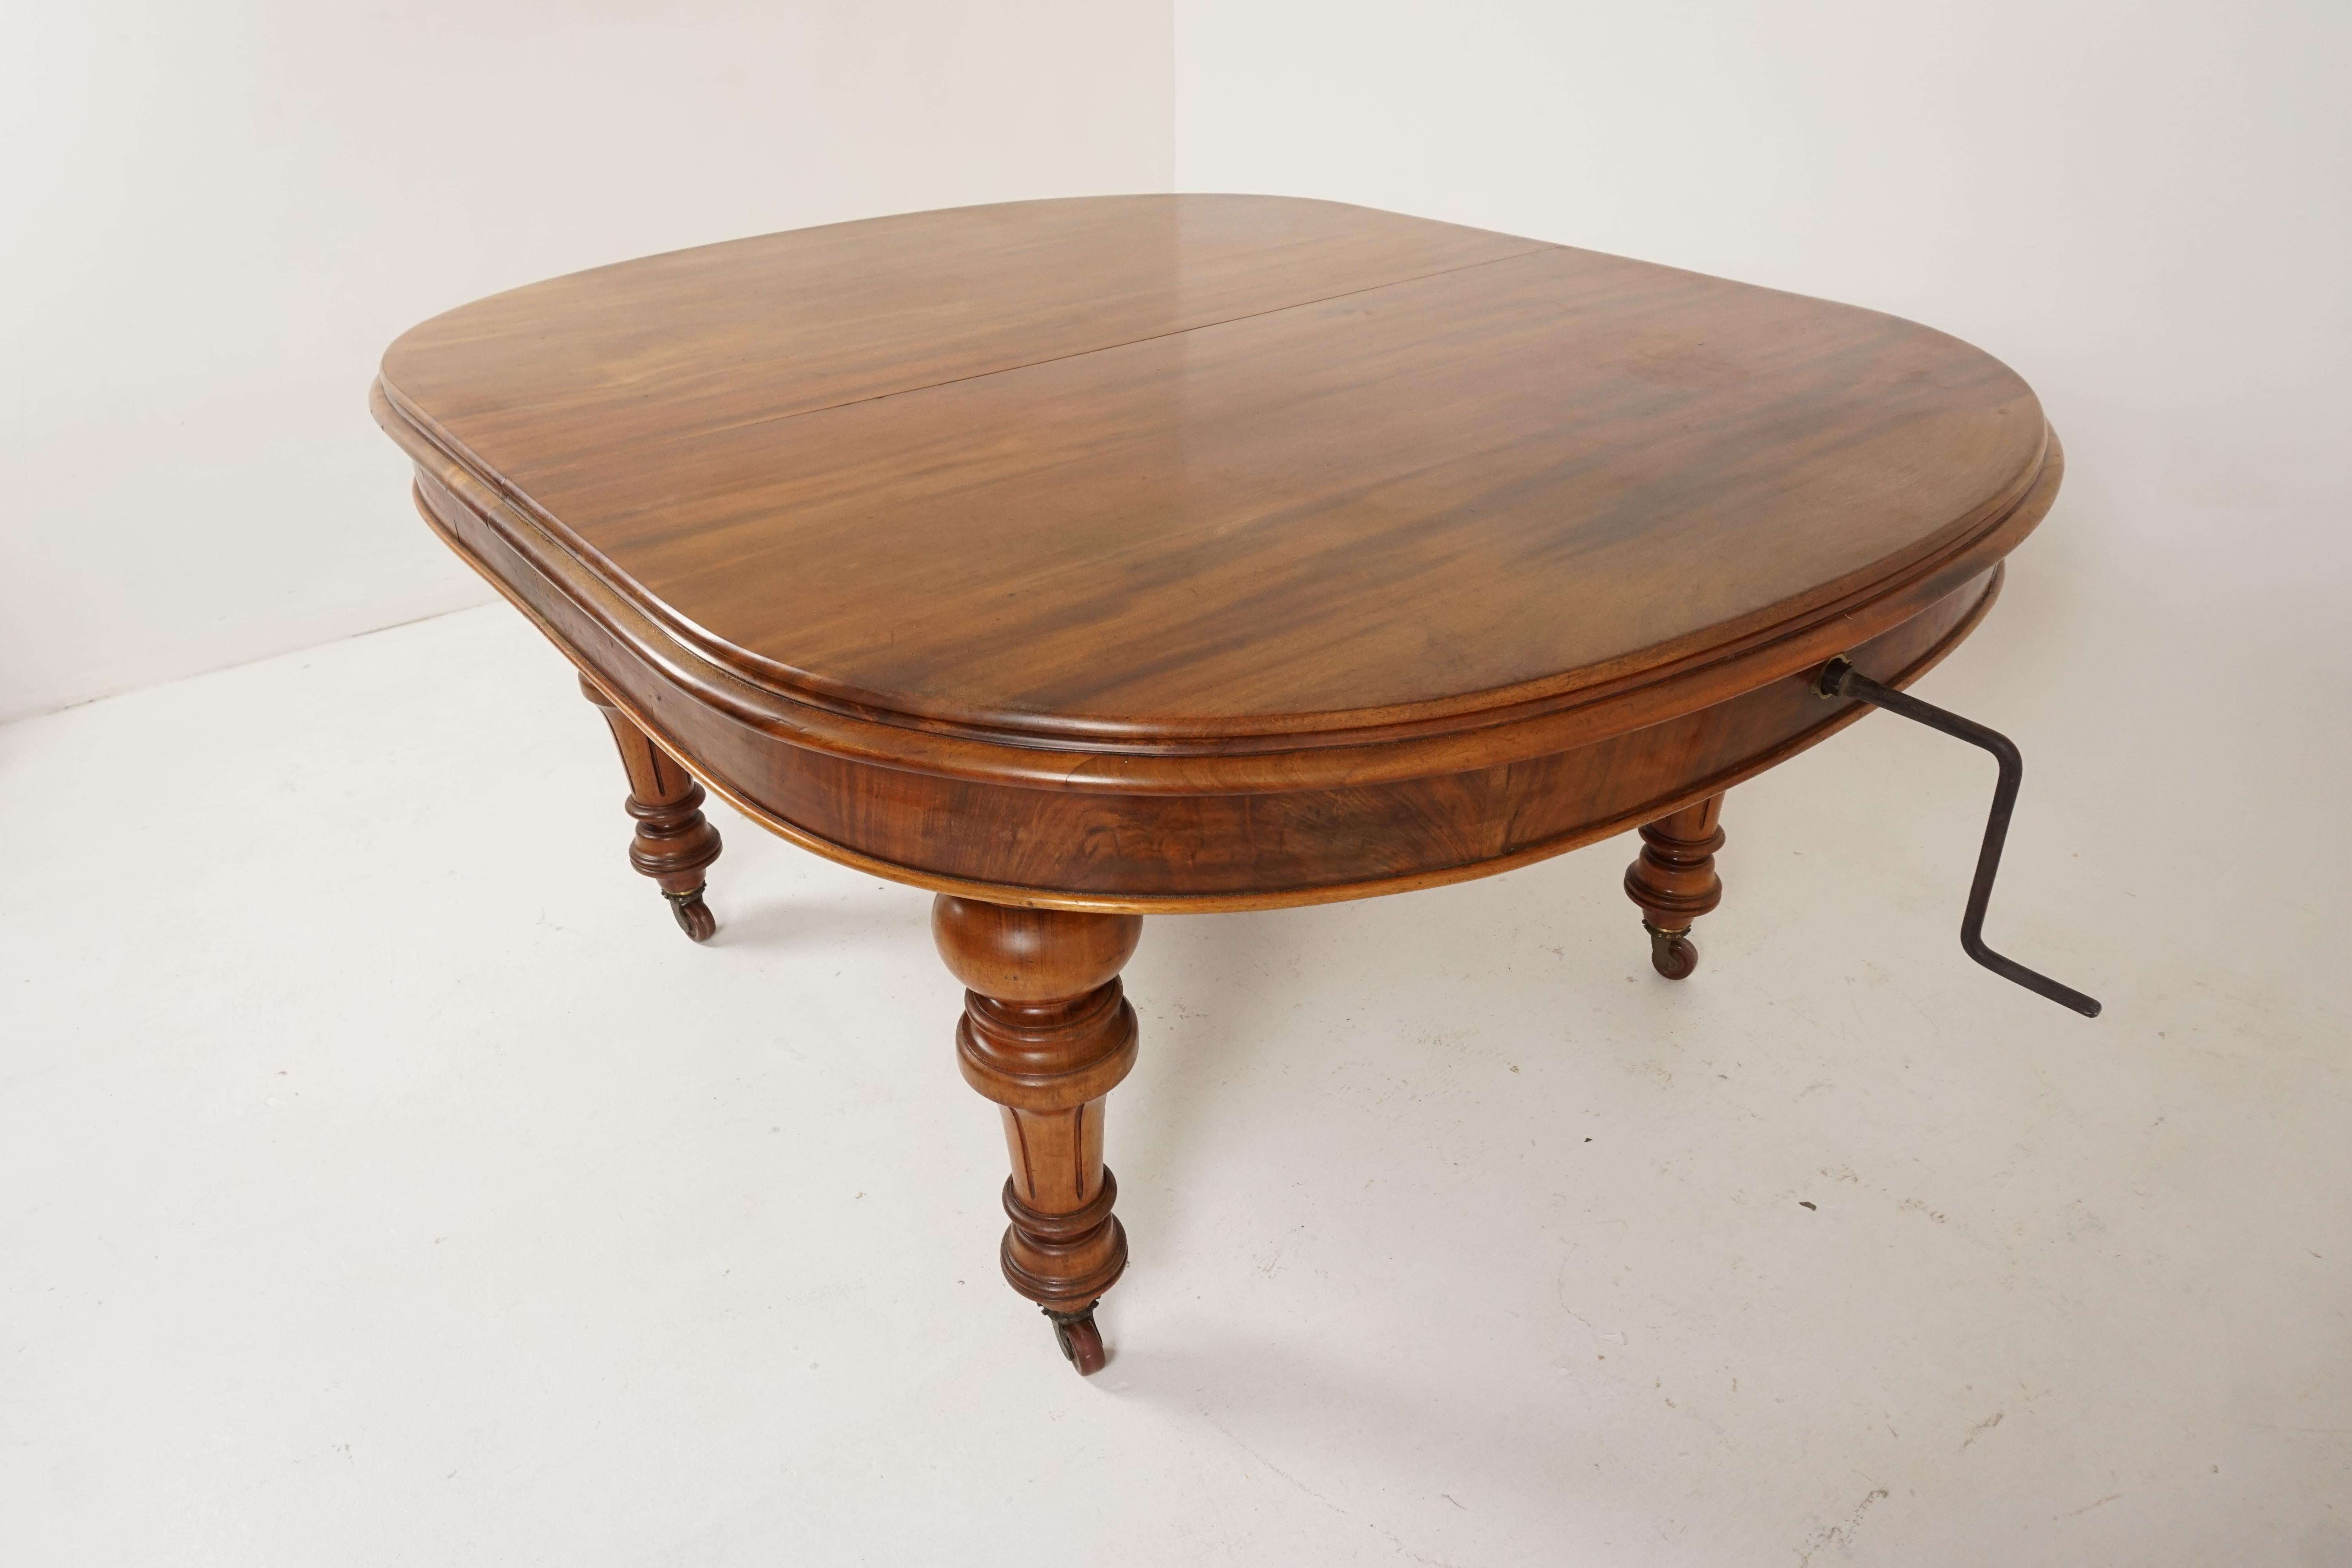 Antique Victorian Walnut extending dining table with 2 leaves, Scotland 1880, B1958

Scotland, 1880
Solid Walnut
Original finish
Rare oval ended shape
Double moulded edge on top
Stands on four turned faceted tapering legs
With brass caps and brown